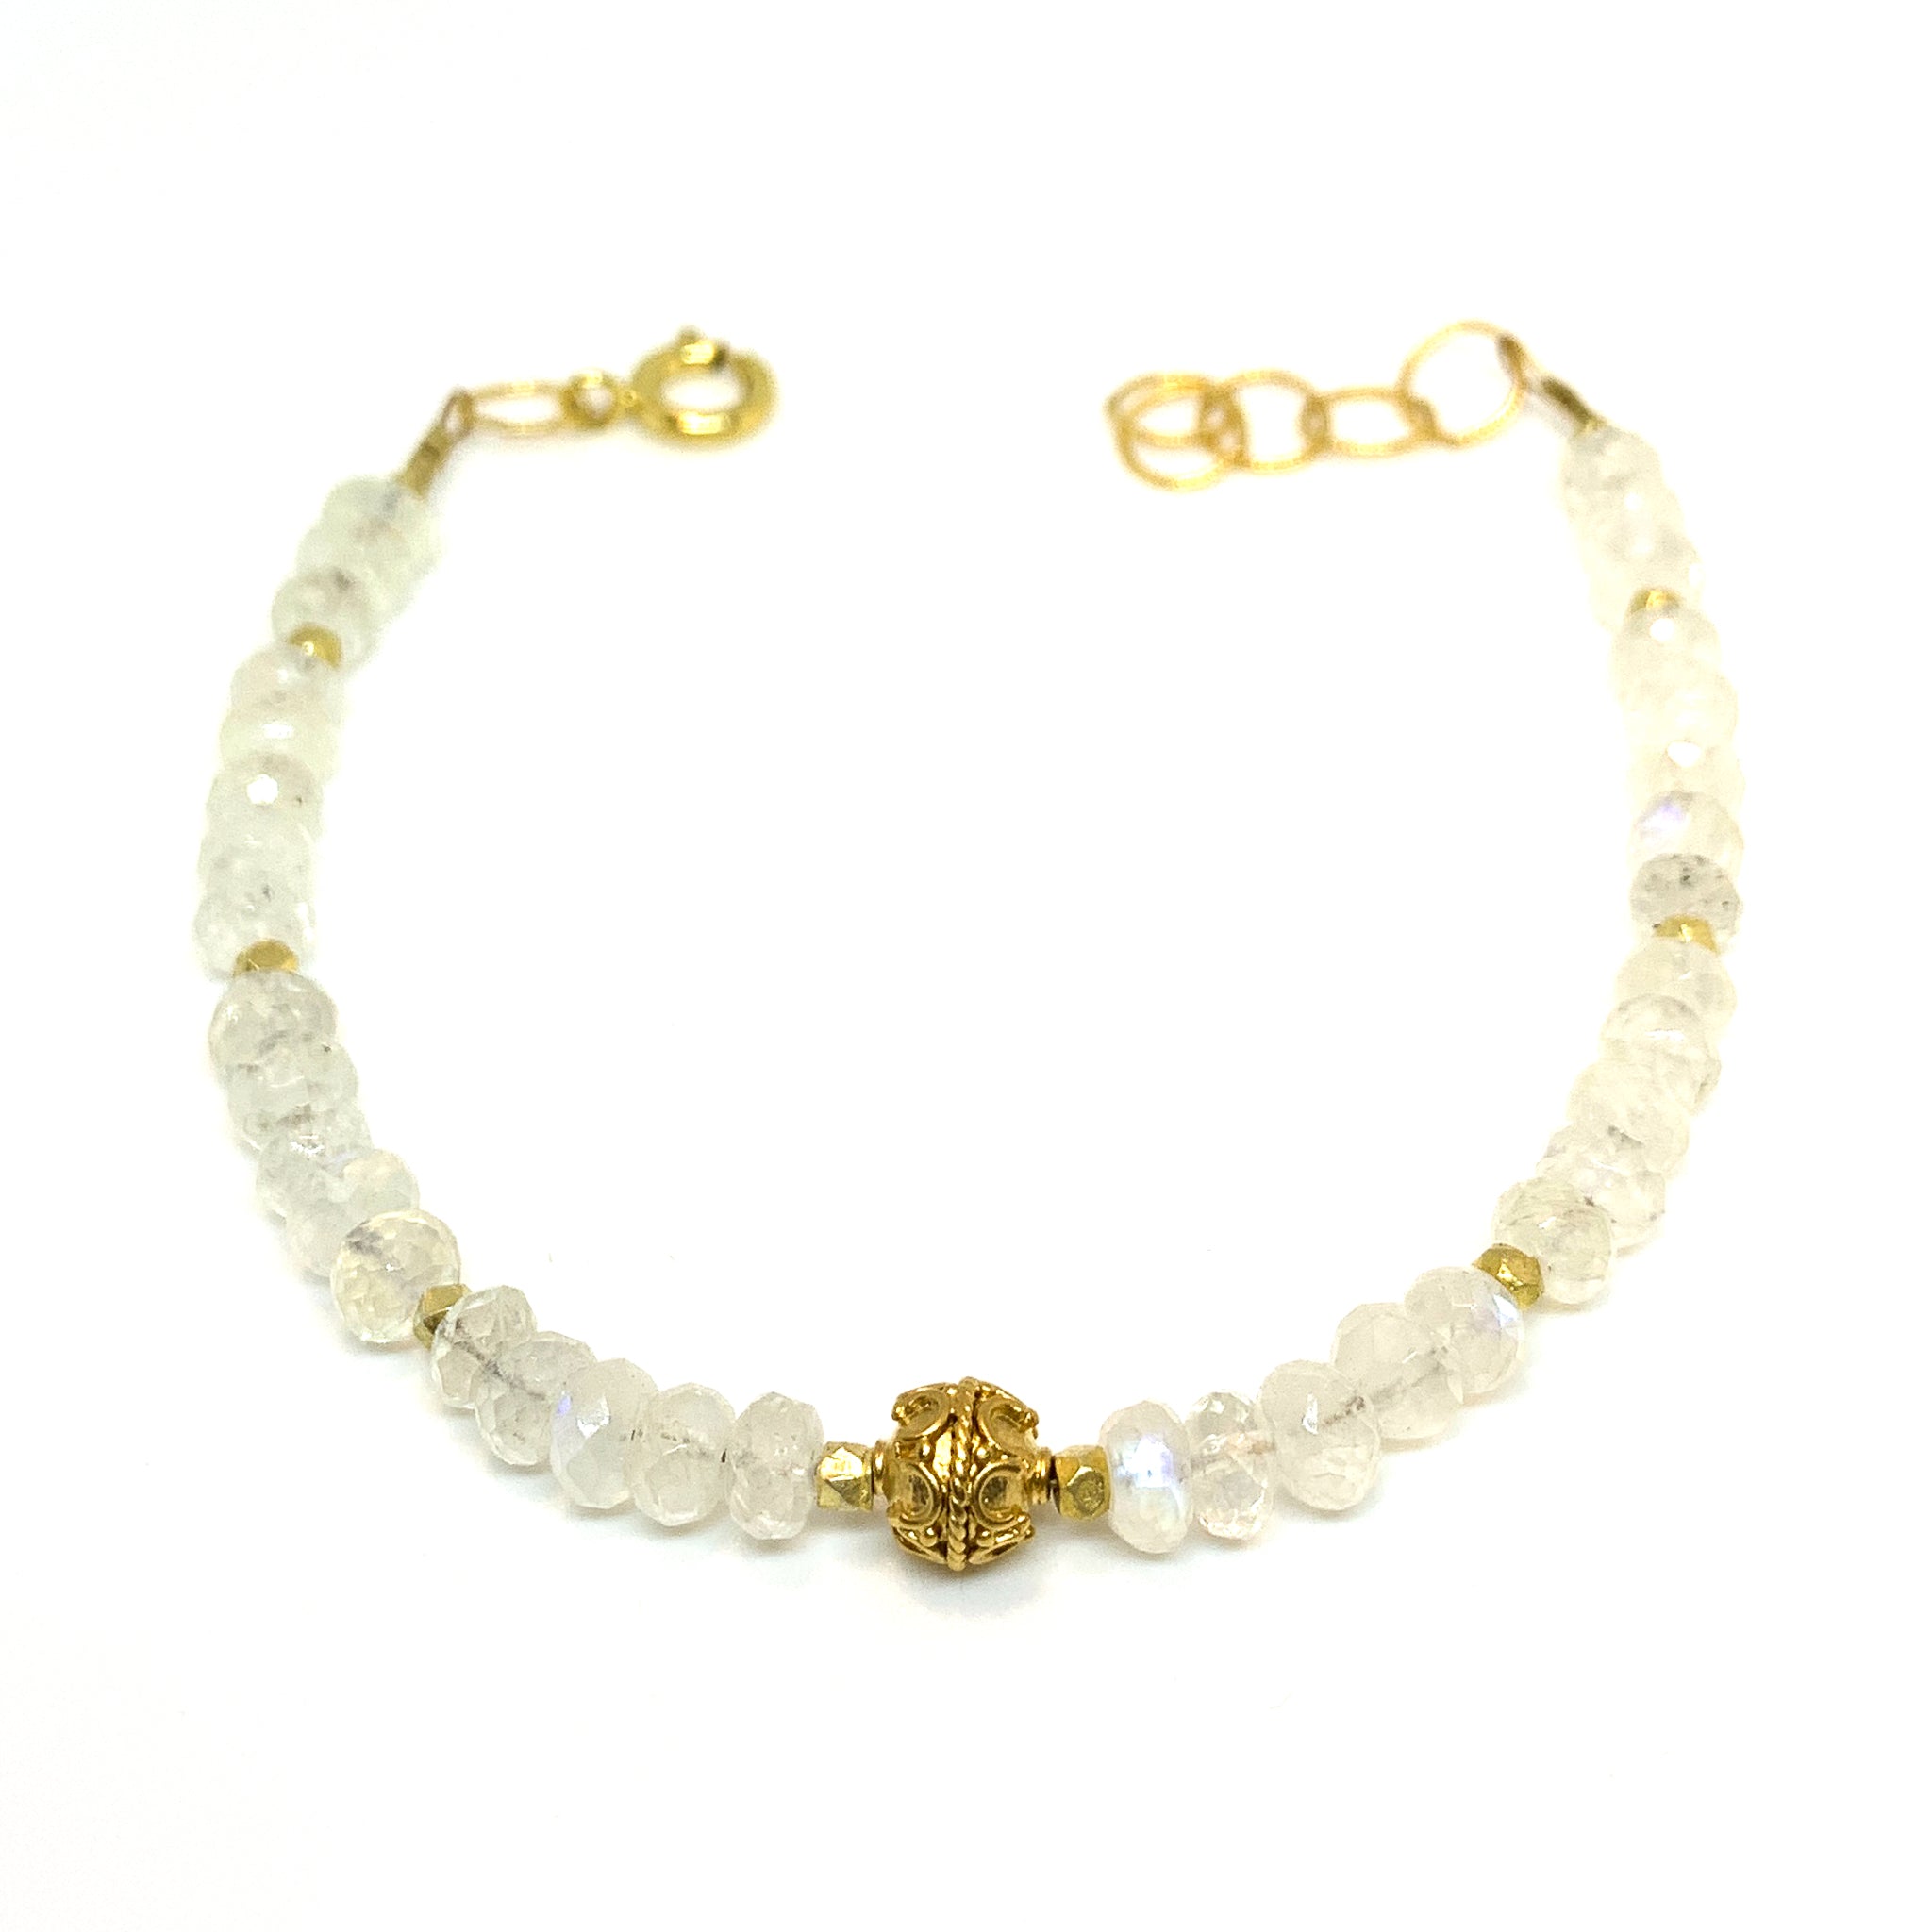 faceted moonstone and vermeil bead bracelet by eve black jewelry, Hawaii